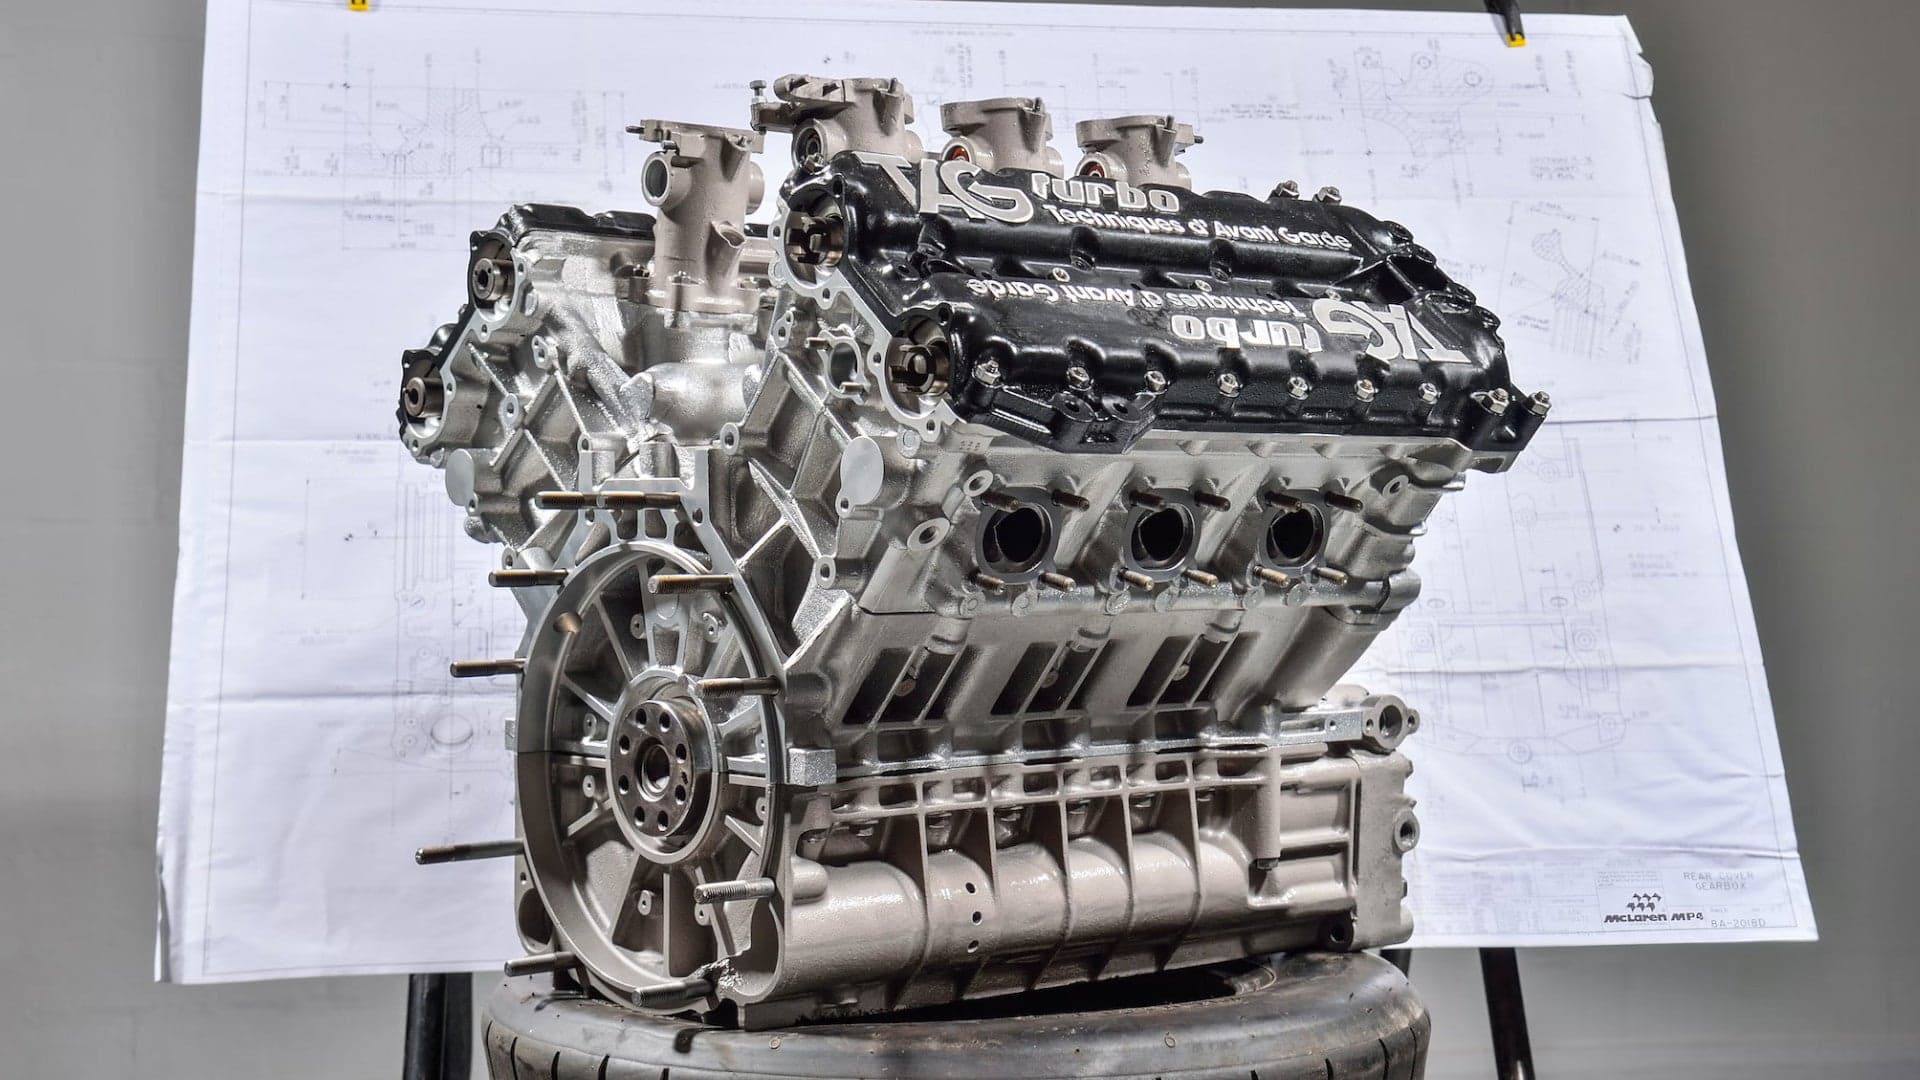 Buy This 1,060-HP Porsche F1 Engine for Your Holy Grail Swap Project